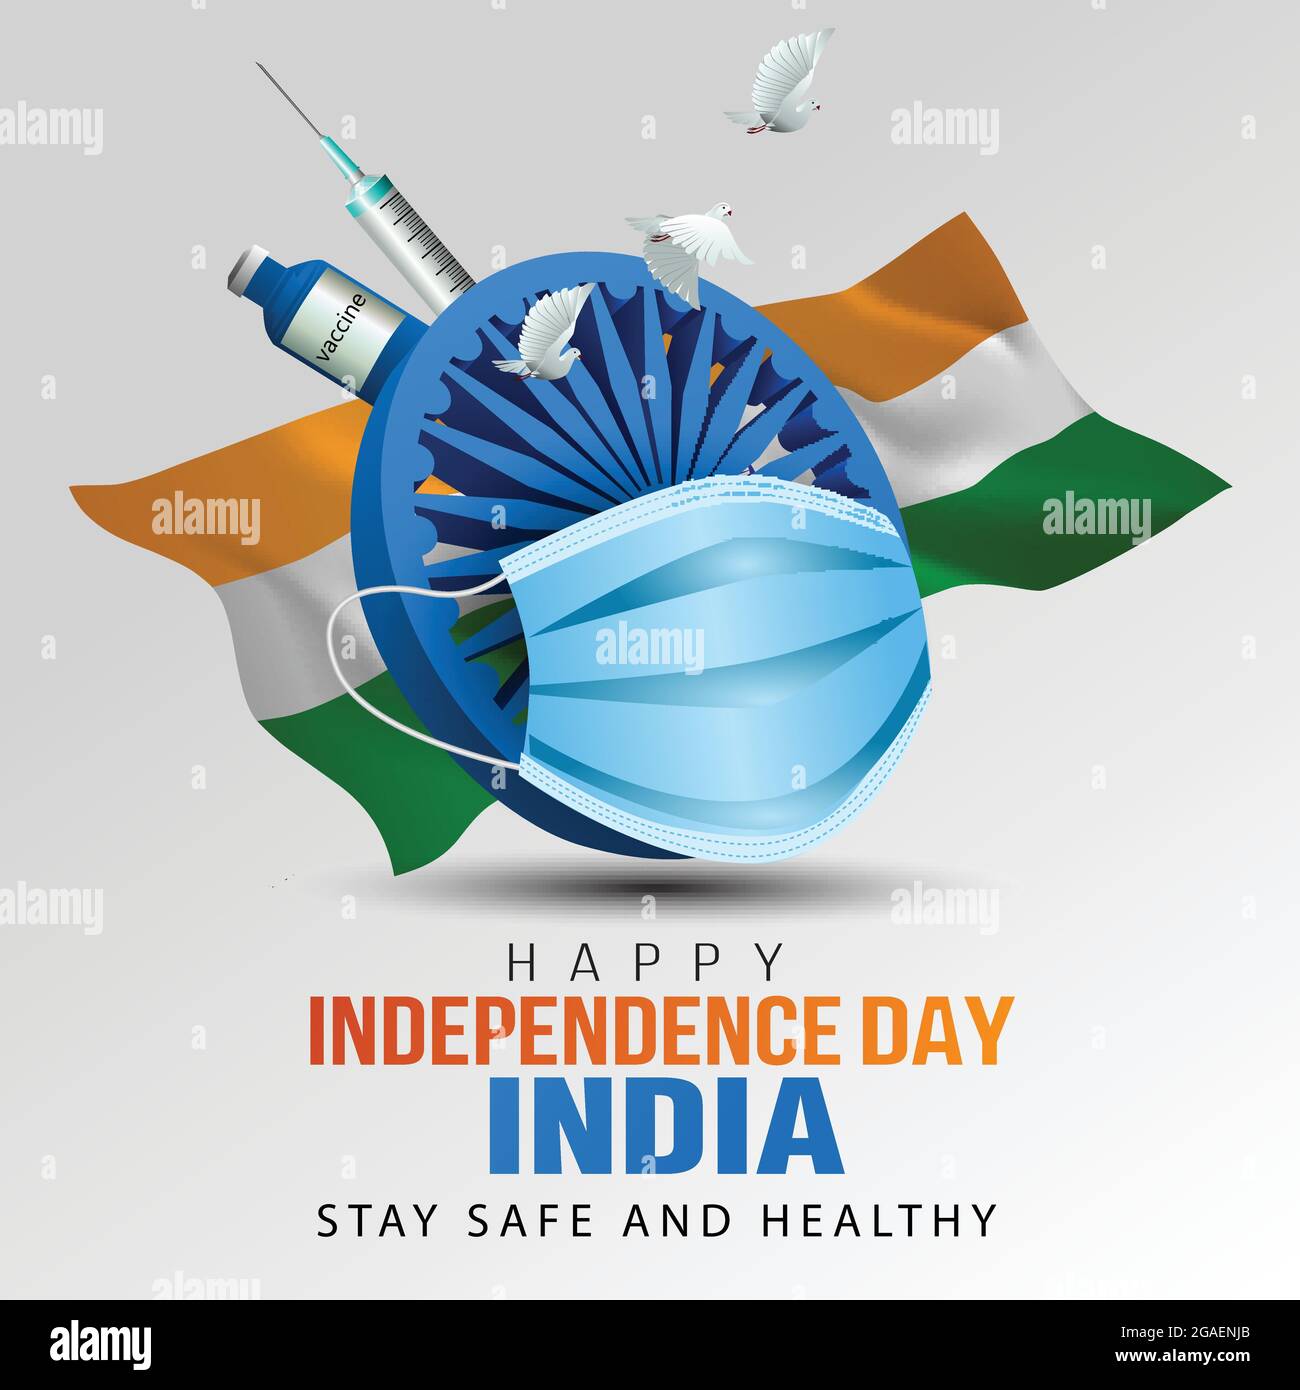 happy independence day India greetings. vector illushappy independence day India greetings. vector illustration design. covid-19, corona virus concept Stock Vector